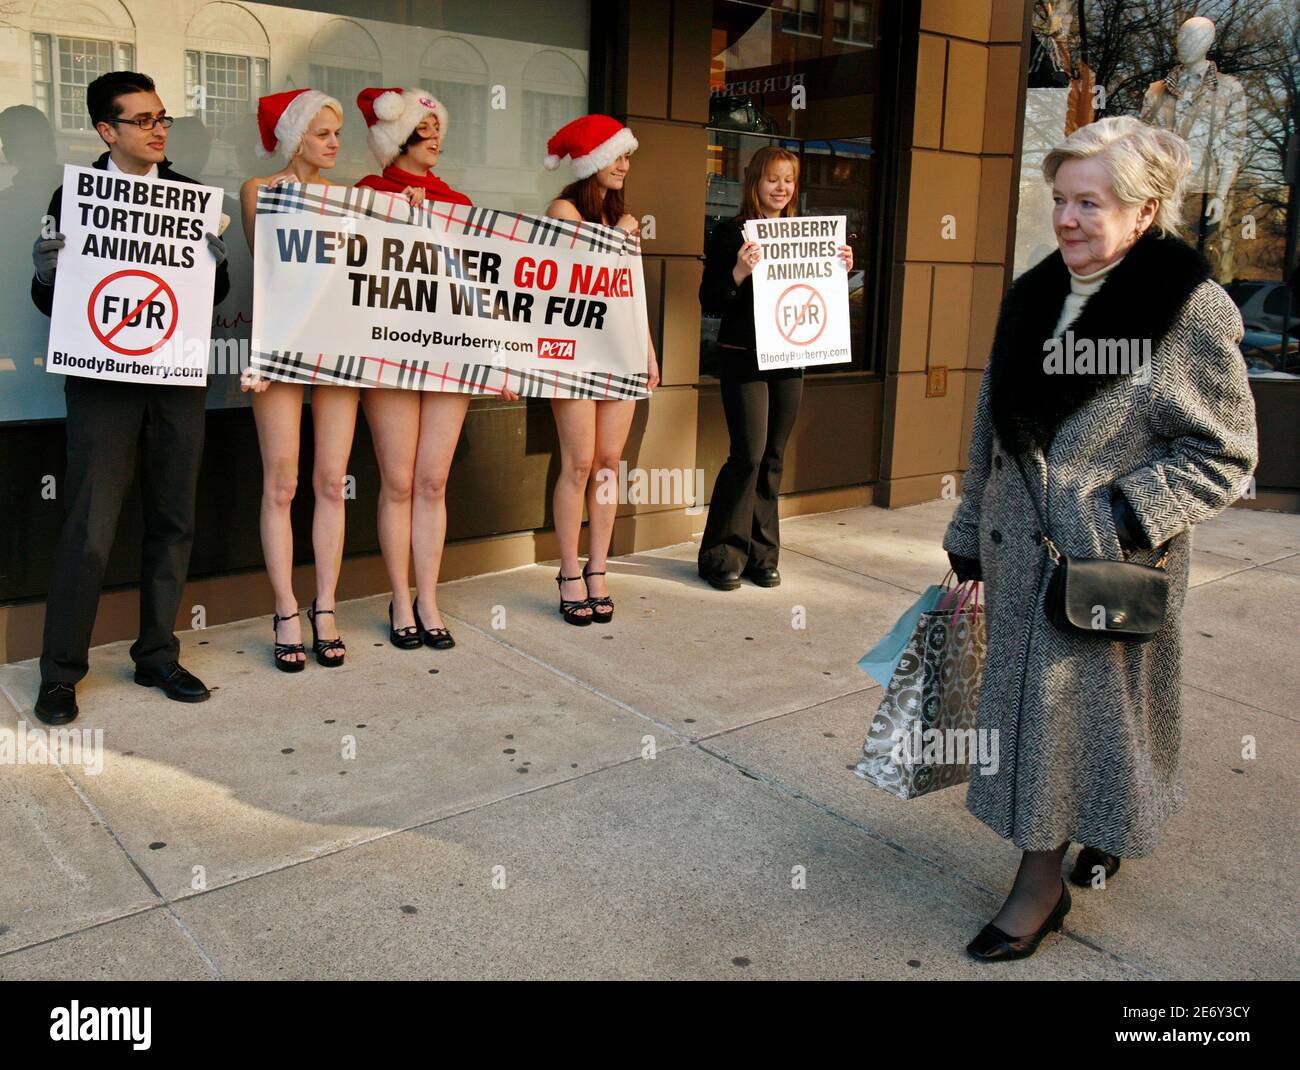 A passer-by looks at demonstrators from People for the Ethical Treatment of  Animals (PETA) protesting against the use of animal furs in Burberry  products, outside the Burberry store on Newbury Street in